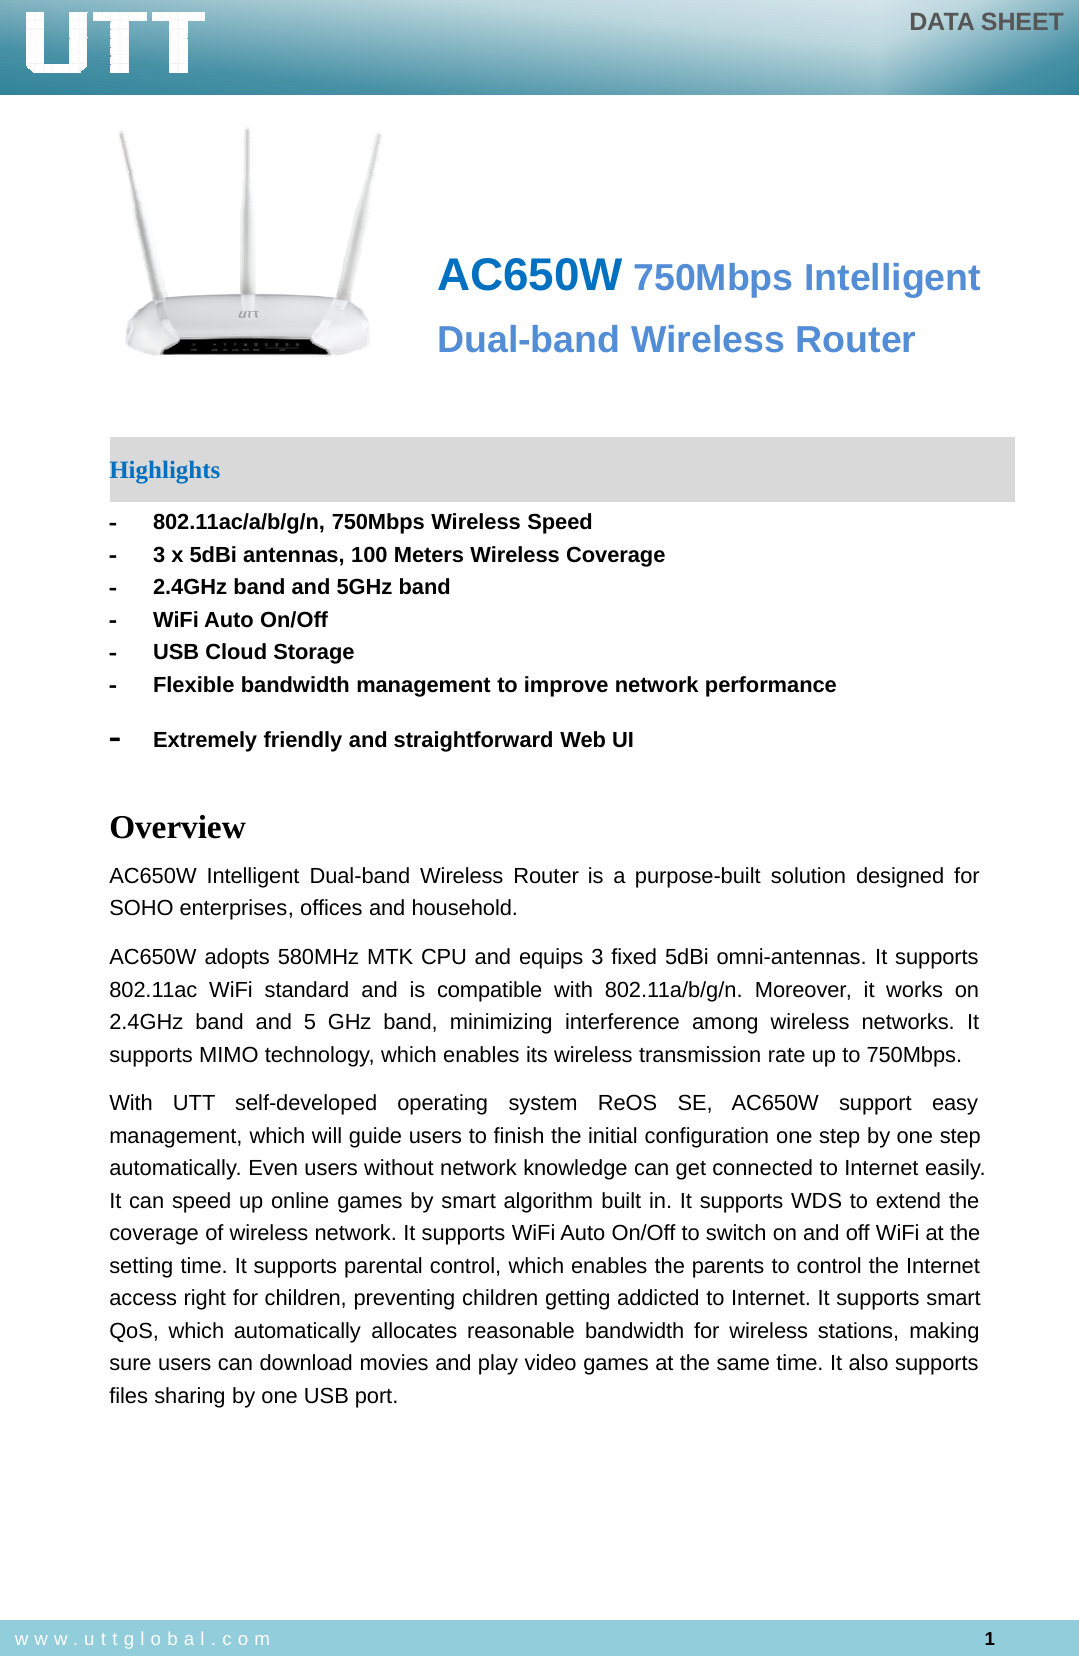 DATA SHEET1www.uttglobal.comAC650W 750Mbps IntelligentDual-band Wireless RouterHighlights-802.11ac/a/b/g/n, 750Mbps Wireless Speed-3 x 5dBi antennas, 100 Meters Wireless Coverage-2.4GHz band and 5GHz band-WiFi Auto On/Off-USB Cloud Storage-Flexible bandwidth management to improve network performance-Extremely friendly and straightforward Web UIOverviewAC650W Intelligent Dual-band Wireless Router is a purpose-built solution designed forSOHO enterprises, offices and household.AC650W adopts 580MHz MTK CPU and equips 3 fixed 5dBi omni-antennas. It supports802.11ac WiFi standard and is compatible with 802.11a/b/g/n. Moreover, it works on2.4GHz band and 5 GHz band, minimizing interference among wireless networks. Itsupports MIMO technology, which enables its wireless transmission rate up to 750Mbps.With UTT self-developed operating system ReOS SE, AC650W support easymanagement, which will guide users to finish the initial configuration one step by one stepautomatically. Even users without network knowledge can get connected to Internet easily.It can speed up online games by smart algorithm built in. It supports WDS to extend thecoverage of wireless network. It supports WiFi Auto On/Off to switch on and off WiFi at thesetting time. It supports parental control, which enables the parents to control the Internetaccess right for children, preventing children getting addicted to Internet. It supports smartQoS, which automatically allocates reasonable bandwidth for wireless stations, makingsure users can download movies and play video games at the same time. It also supportsfiles sharing by one USB port.